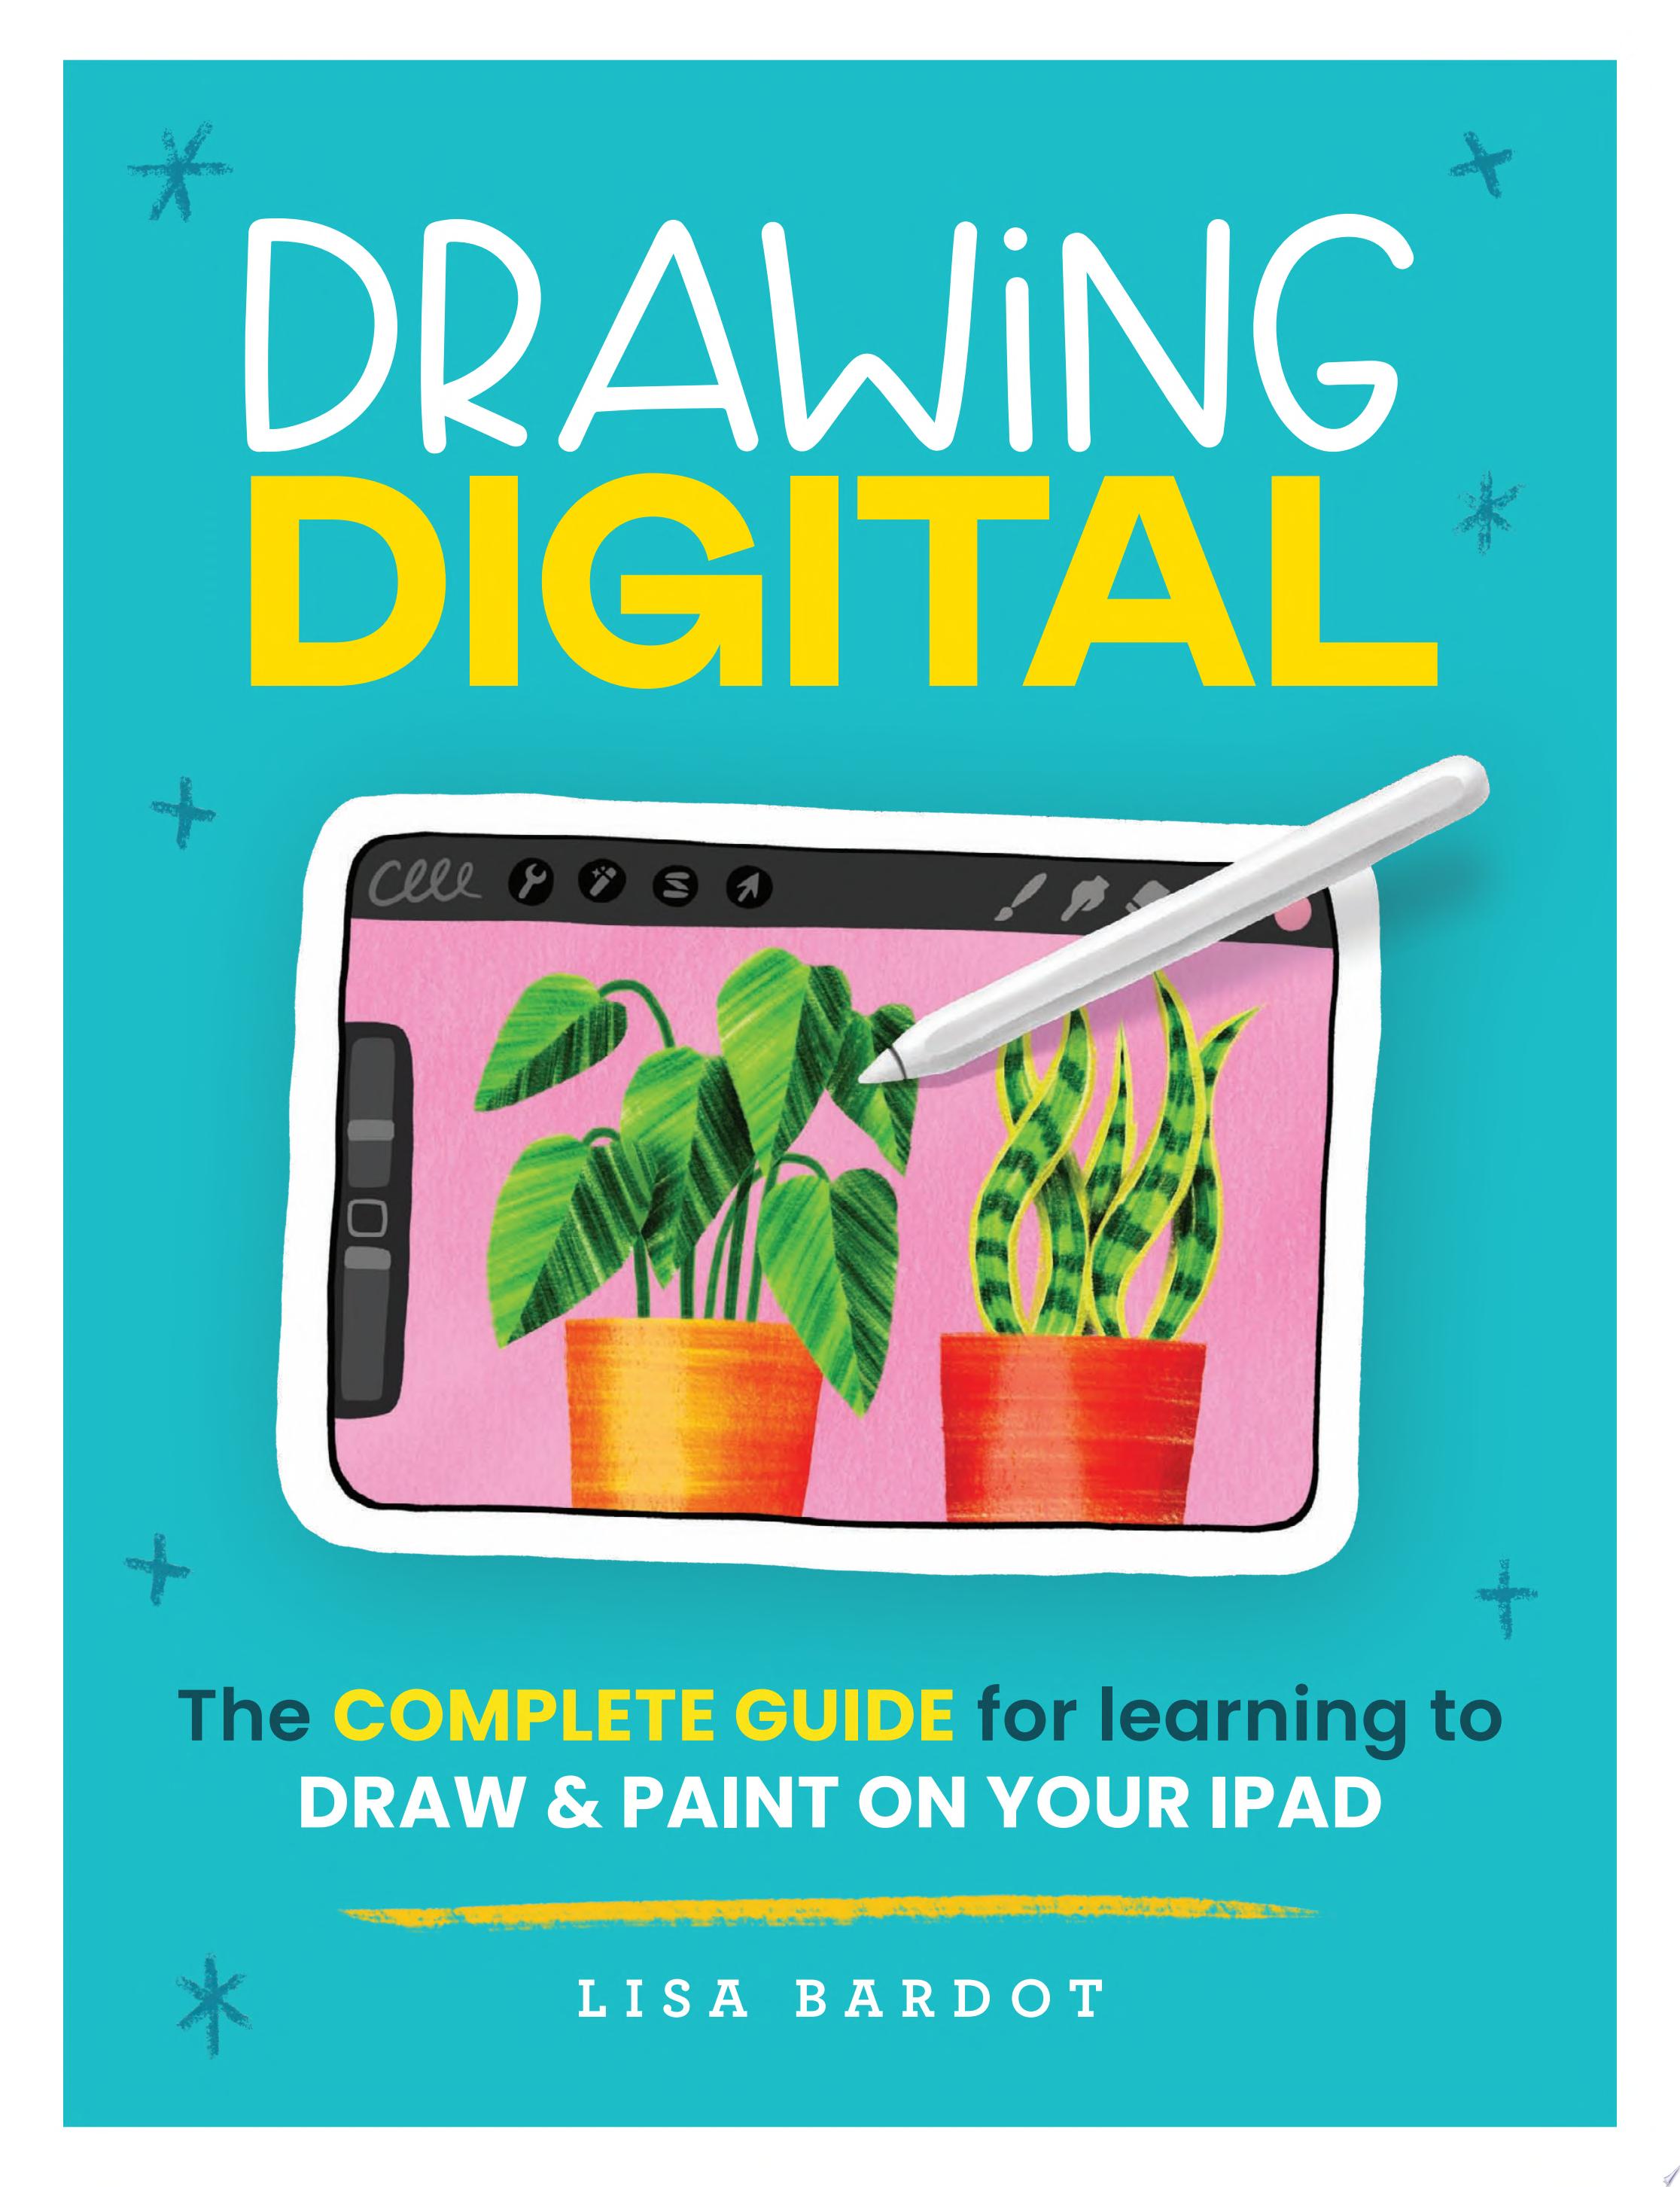 Image for "Drawing Digital"